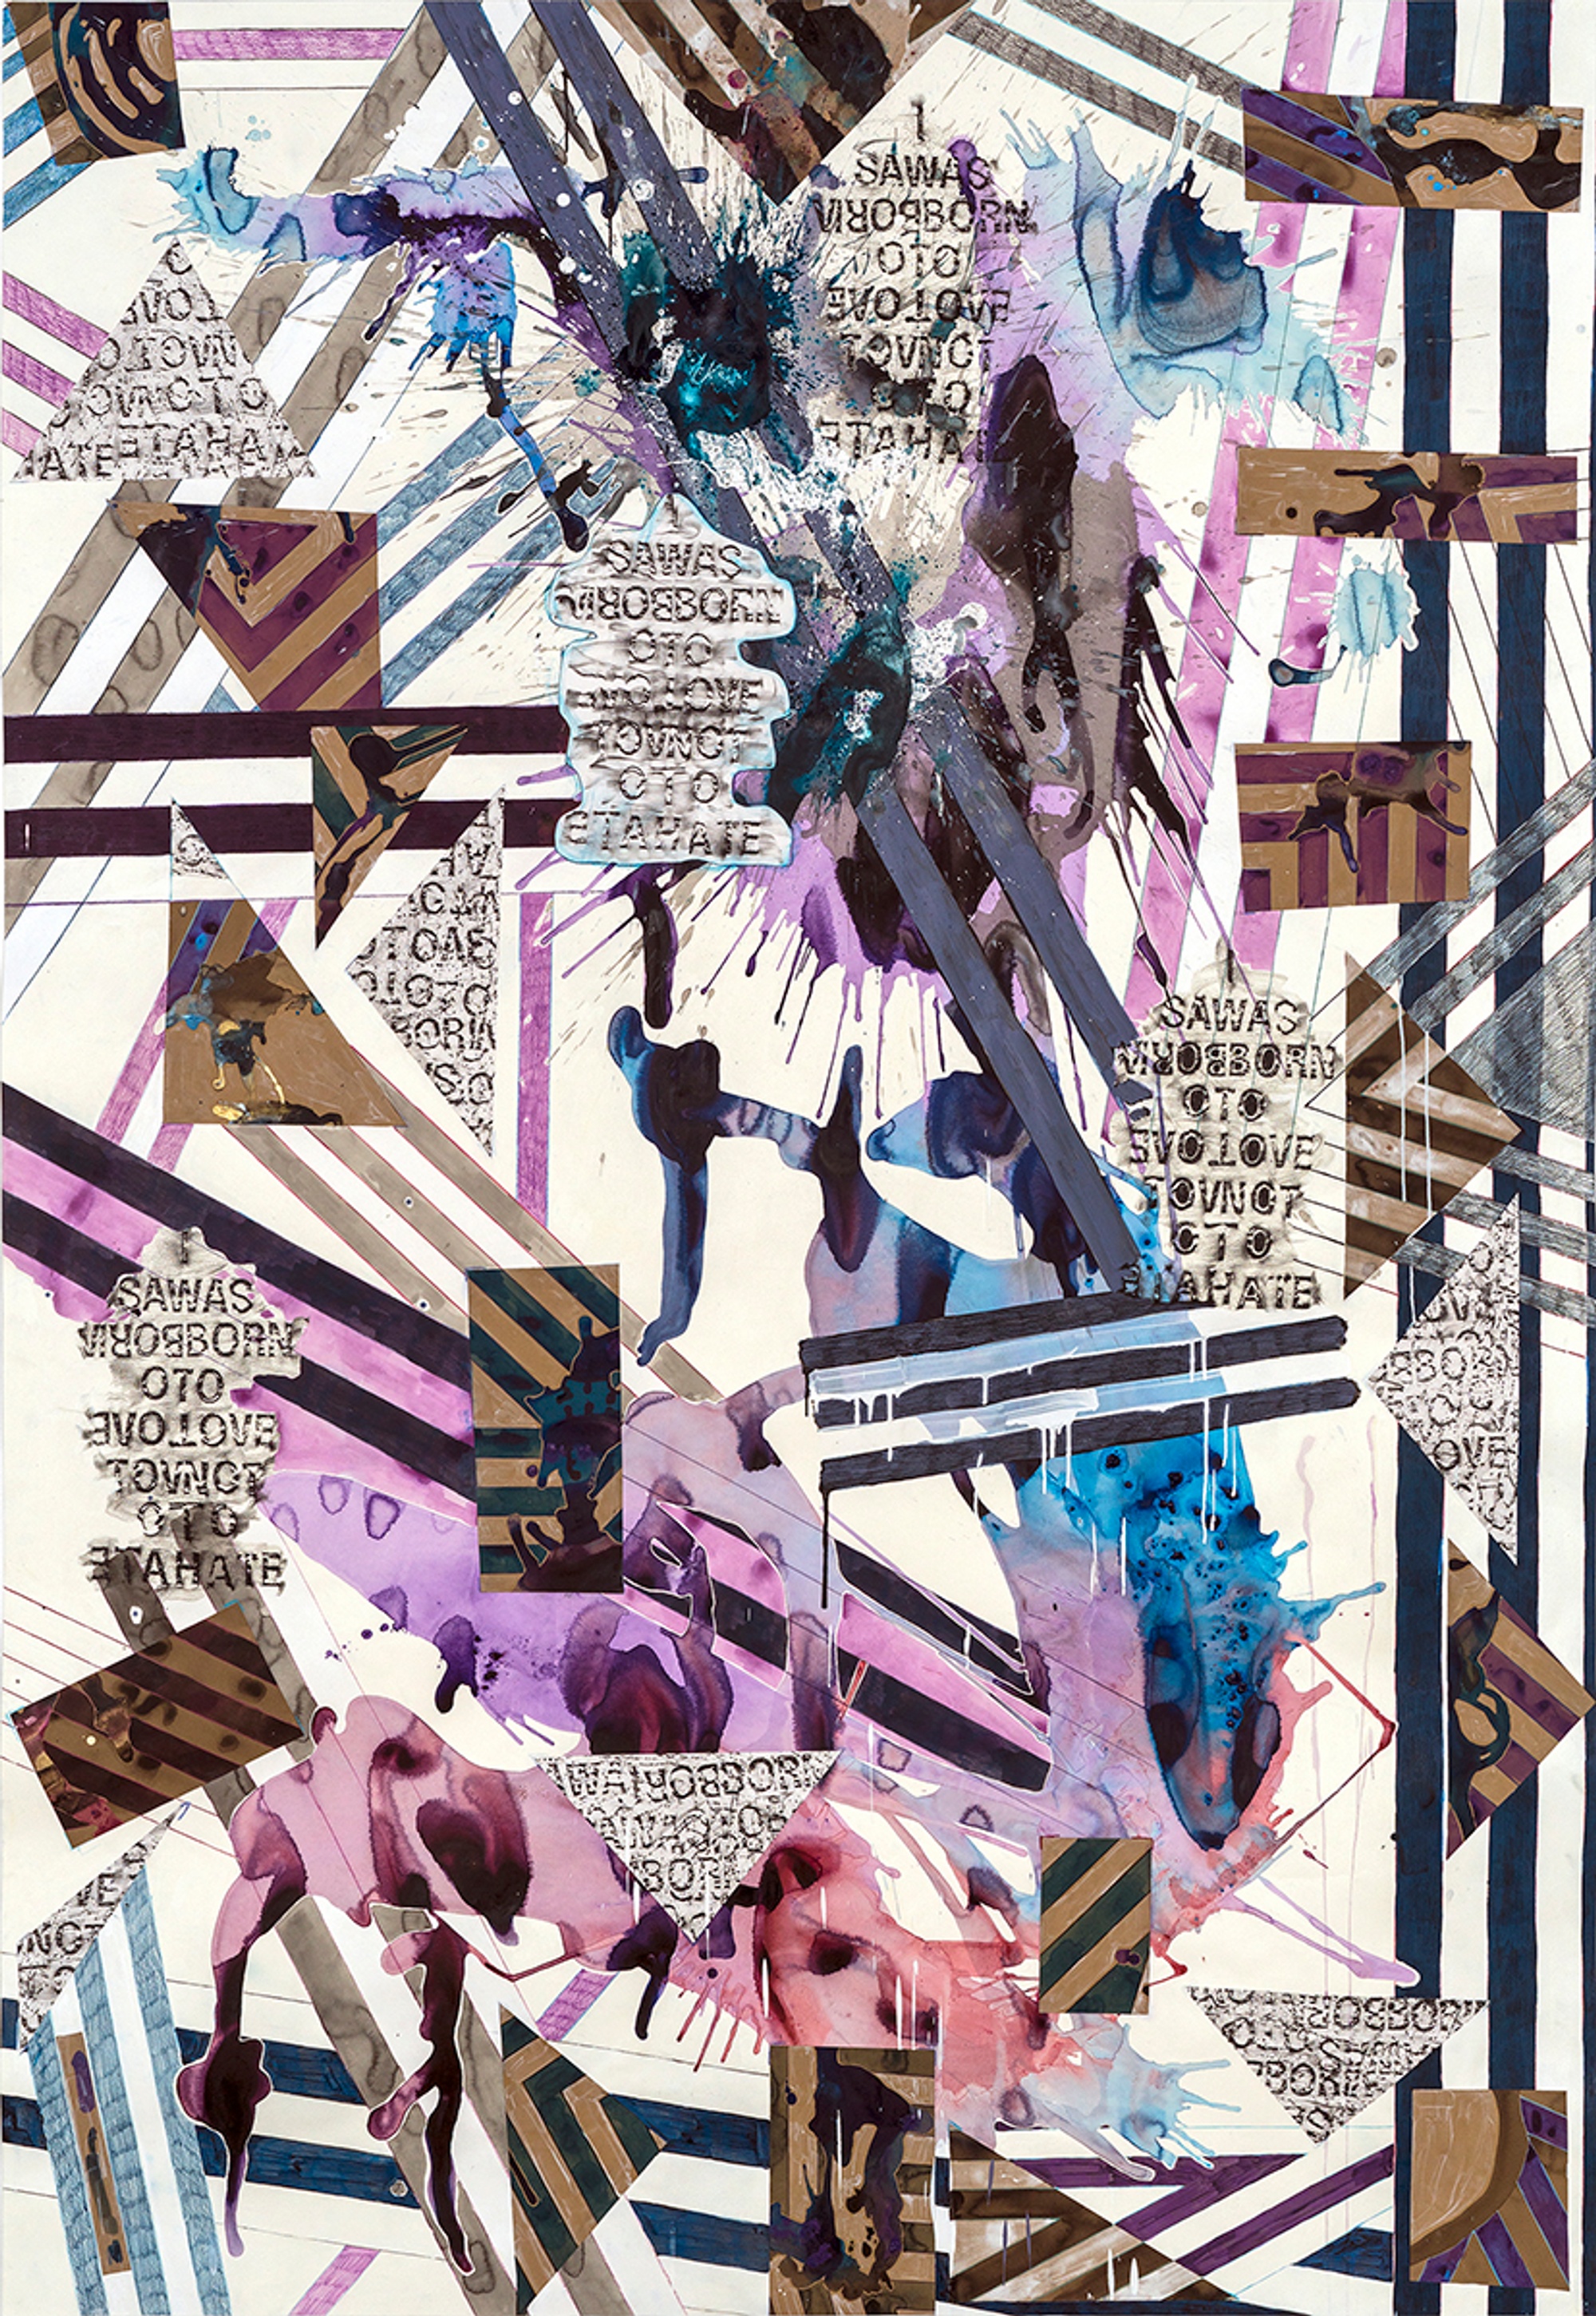 AG-004_Alexandra Grant, Antigone 3000 (2), 2018, Collage, wax rubbing, acrylic paint and ink, sumi ink and colored pencil on paper, 106 x 72 inches_150dpi.jpg